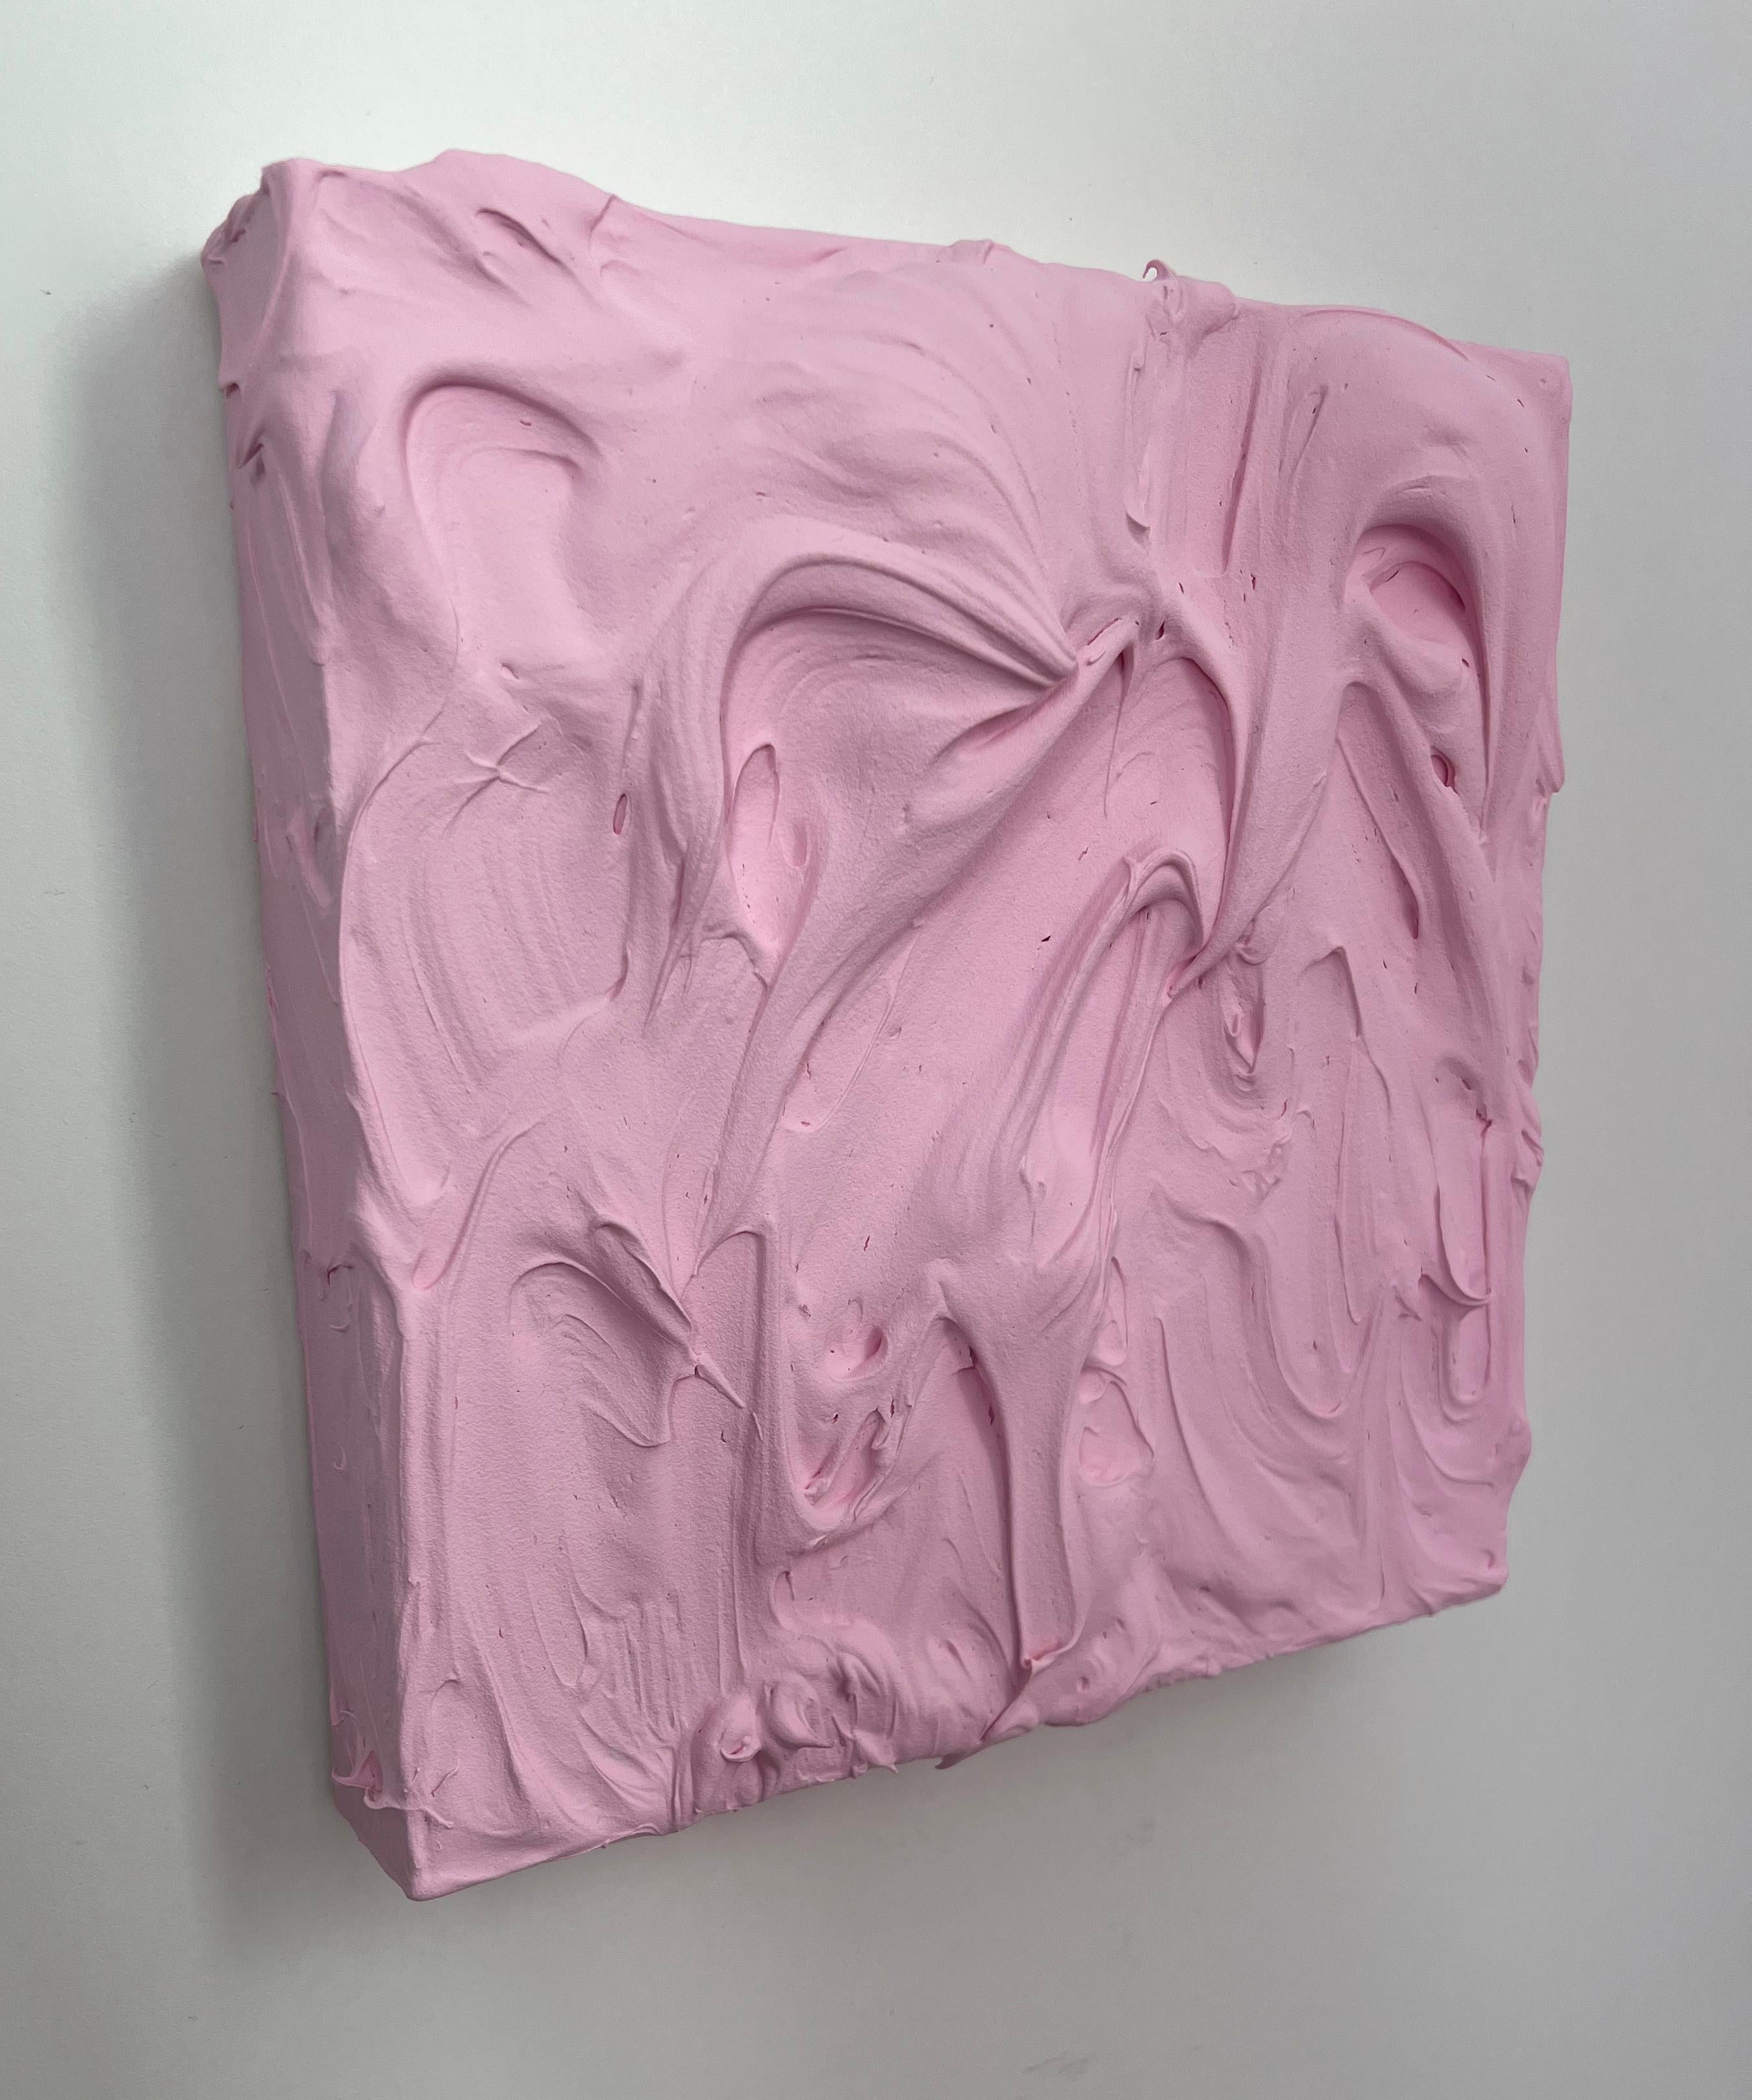 Baby Pink Excess (rose impasto thick painting monochrome pop square design) - Sculpture by Chloe Hedden